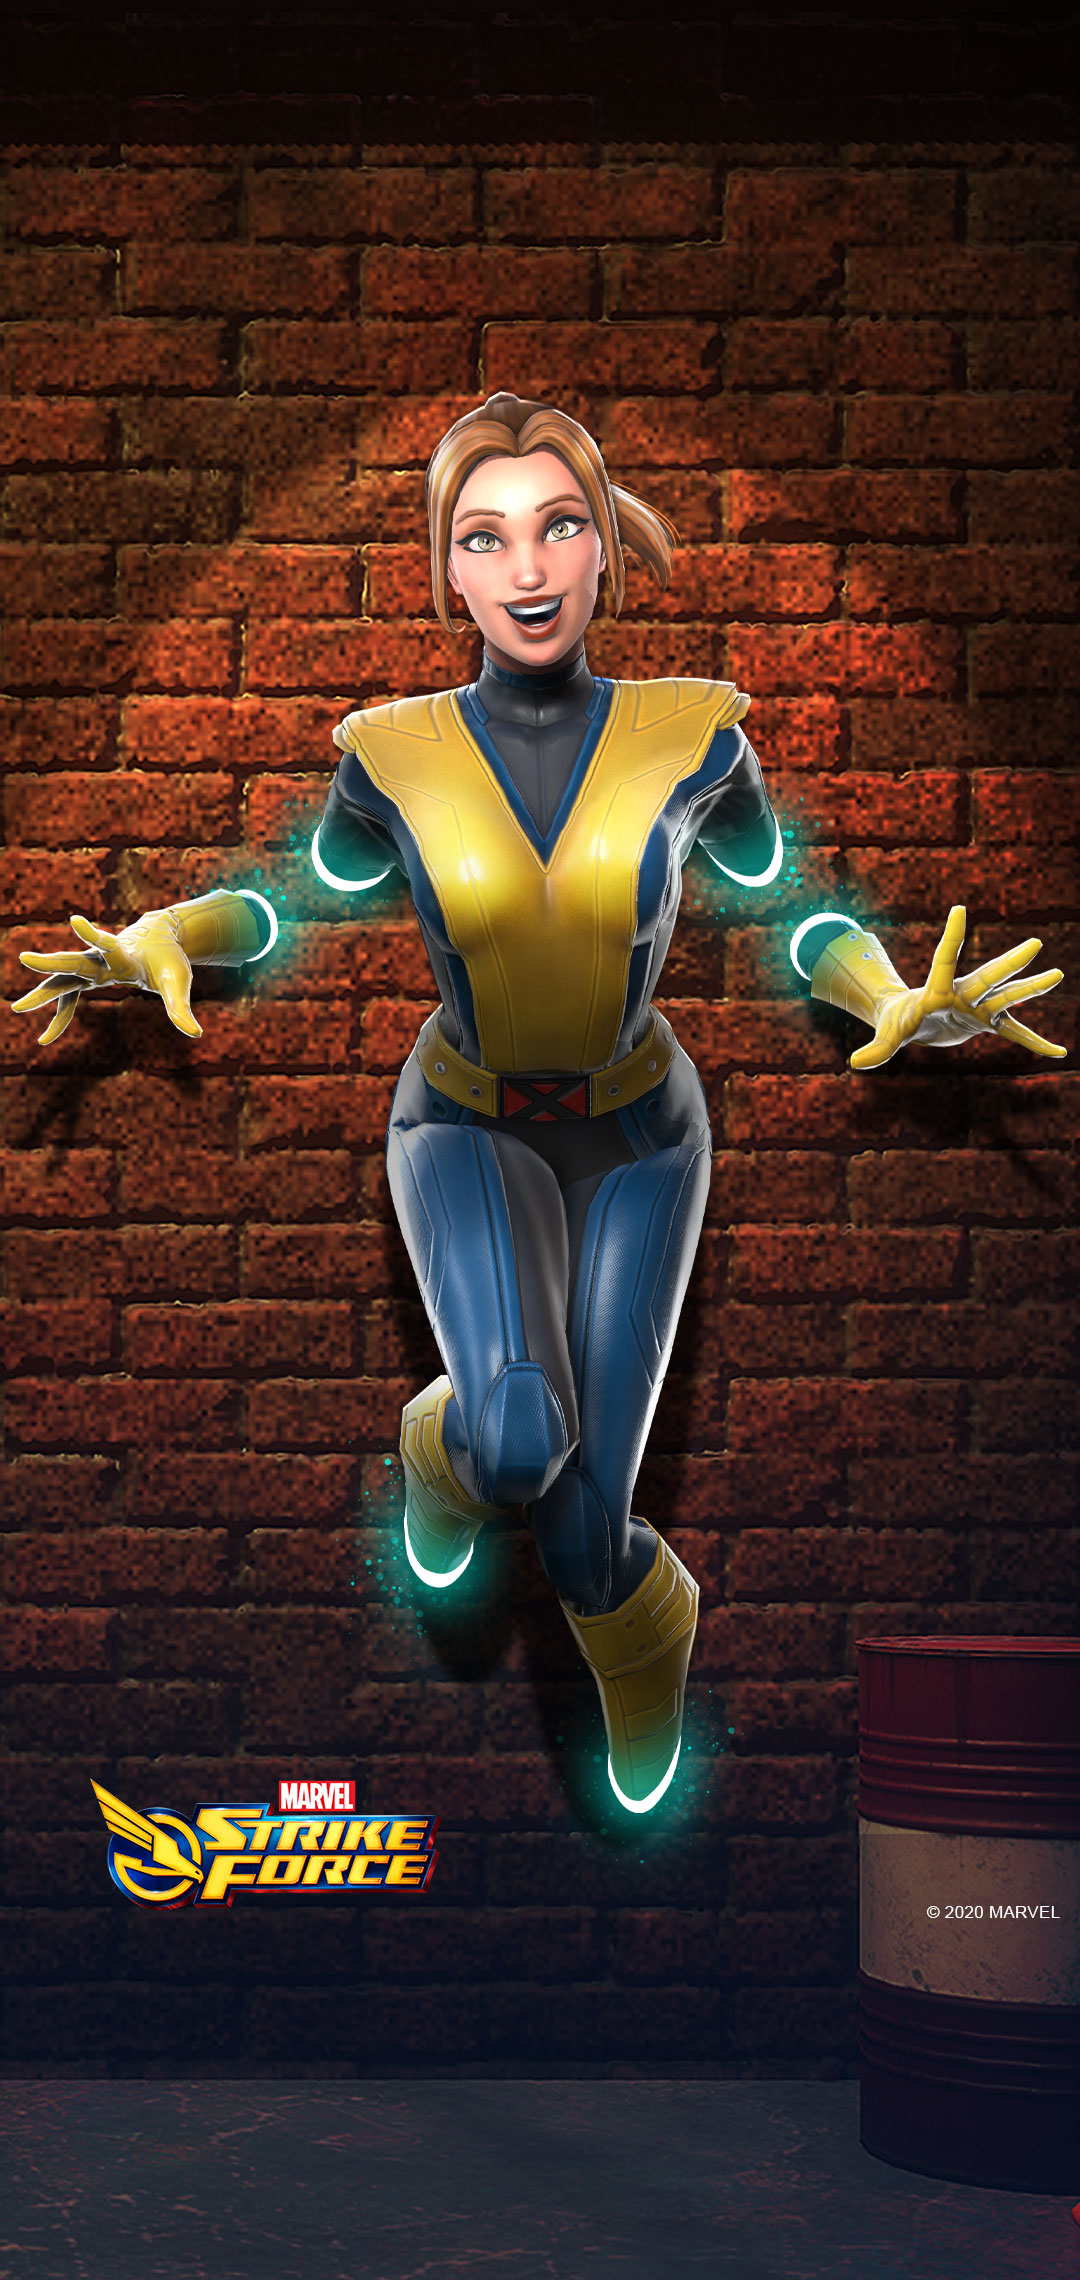 Marvel strike force on kitty pryde wallpaper put it on your phone try to walk through a wall dont do that instantly regret it if you did it httpstcobwbrka